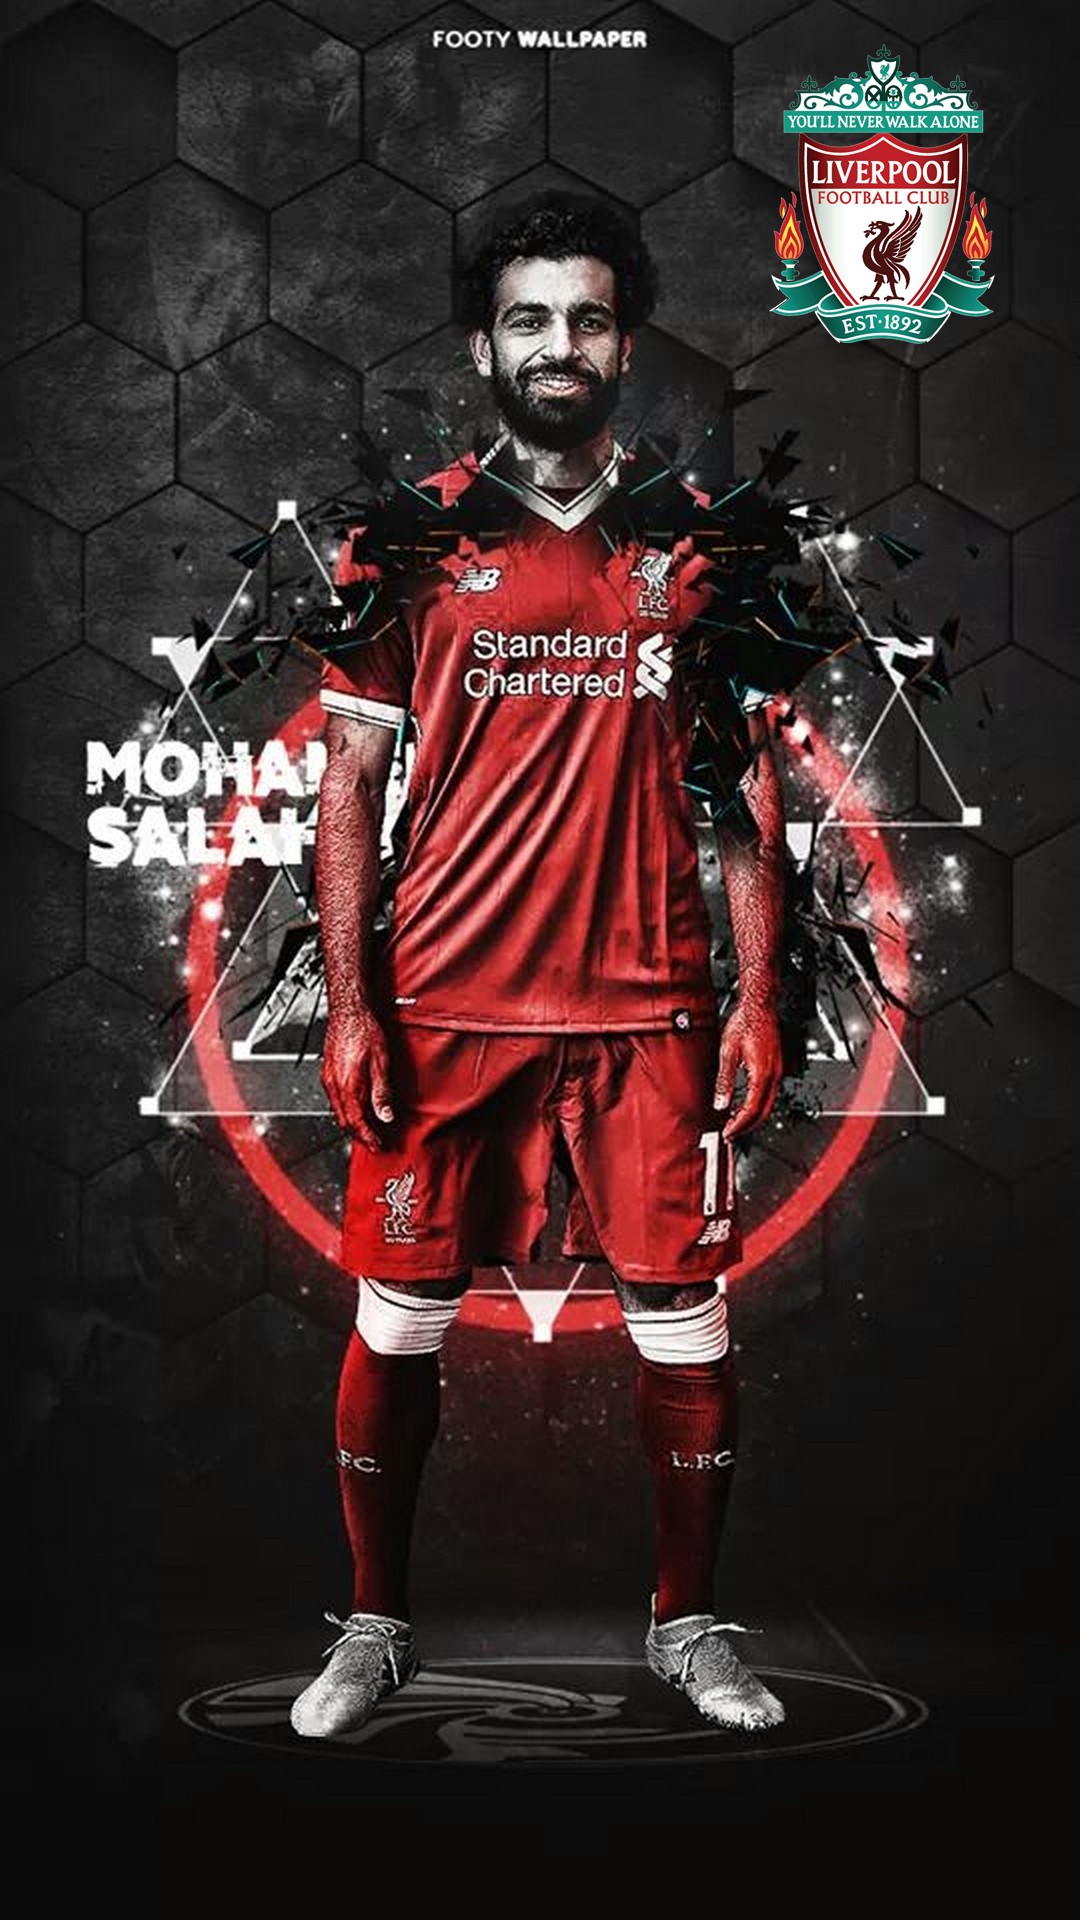 Wallpaper Android Mohamed Salah with image resolution 1080x1920 pixel. You can make this wallpaper for your Android backgrounds, Tablet, Smartphones Screensavers and Mobile Phone Lock Screen